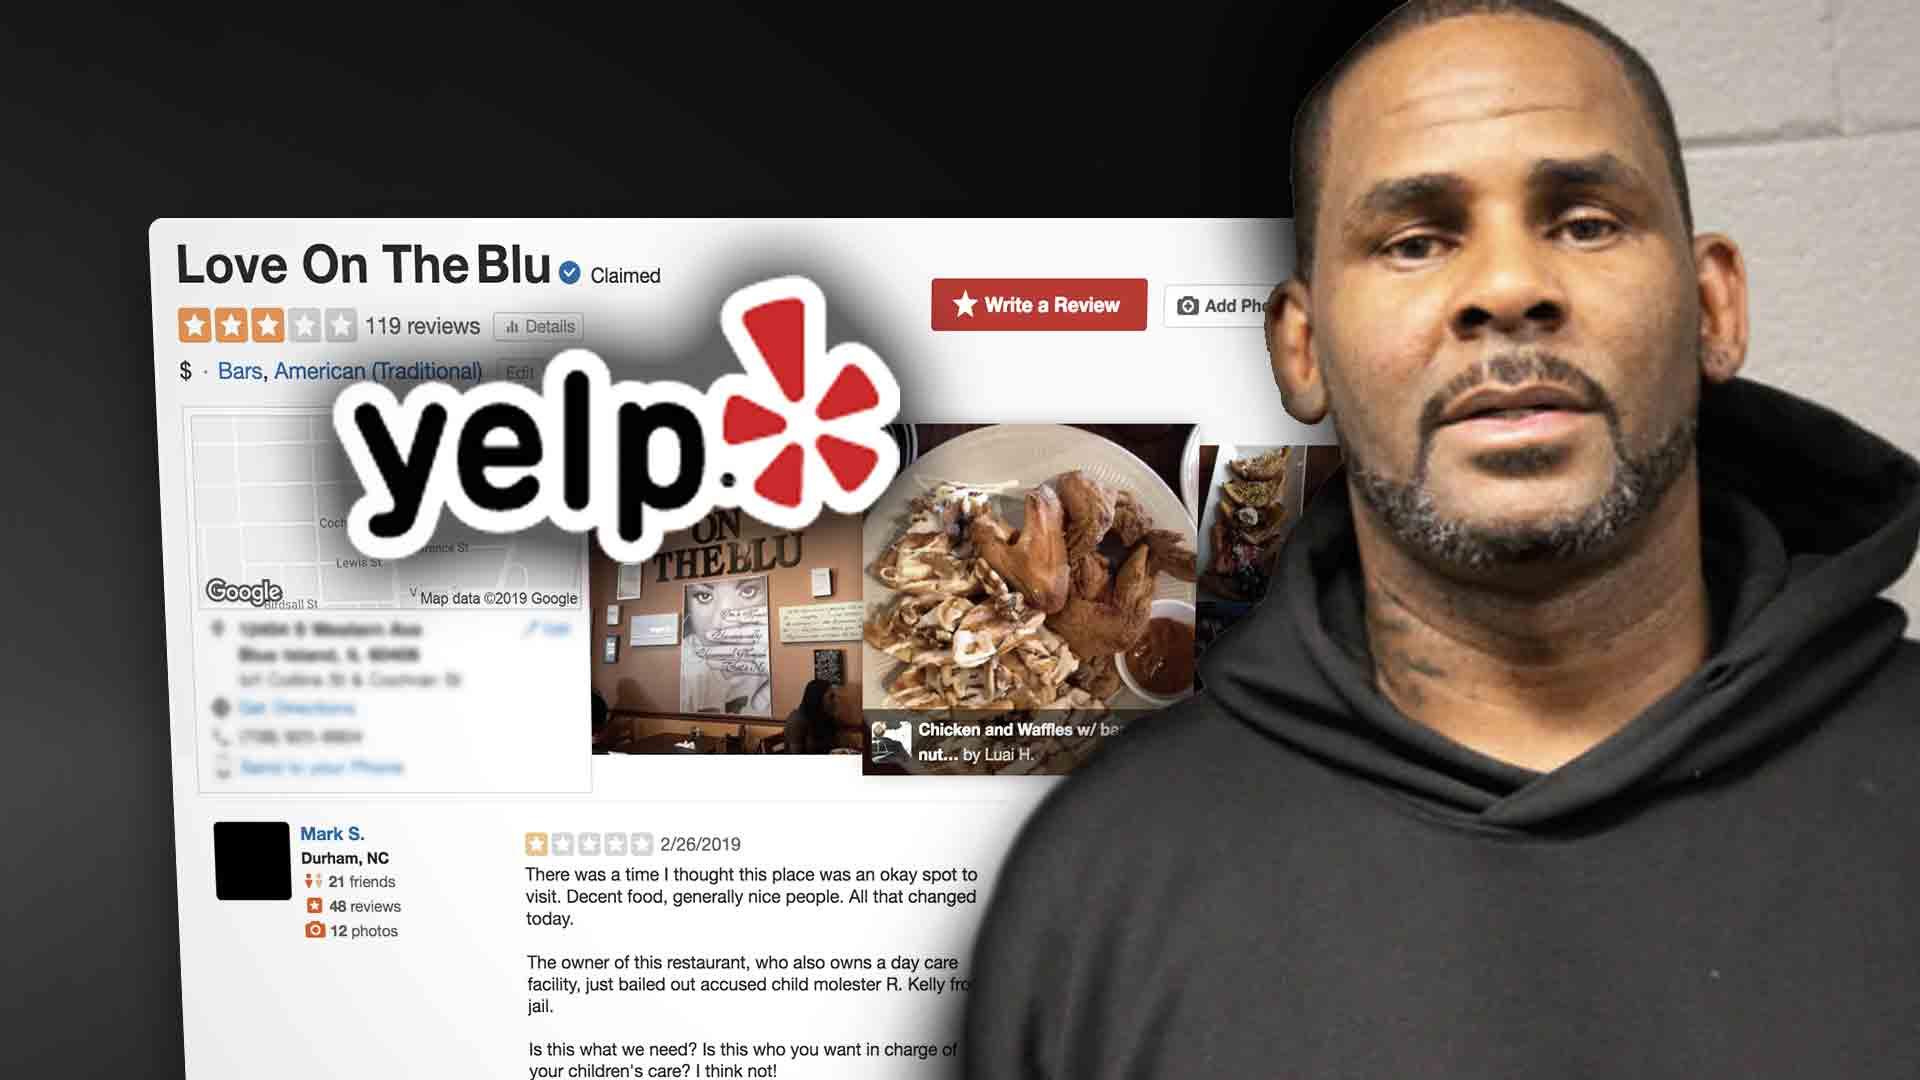 Woman Who Bailed R. Kelly Out of Jail Gets Backlash, Restaurant Trashed Online